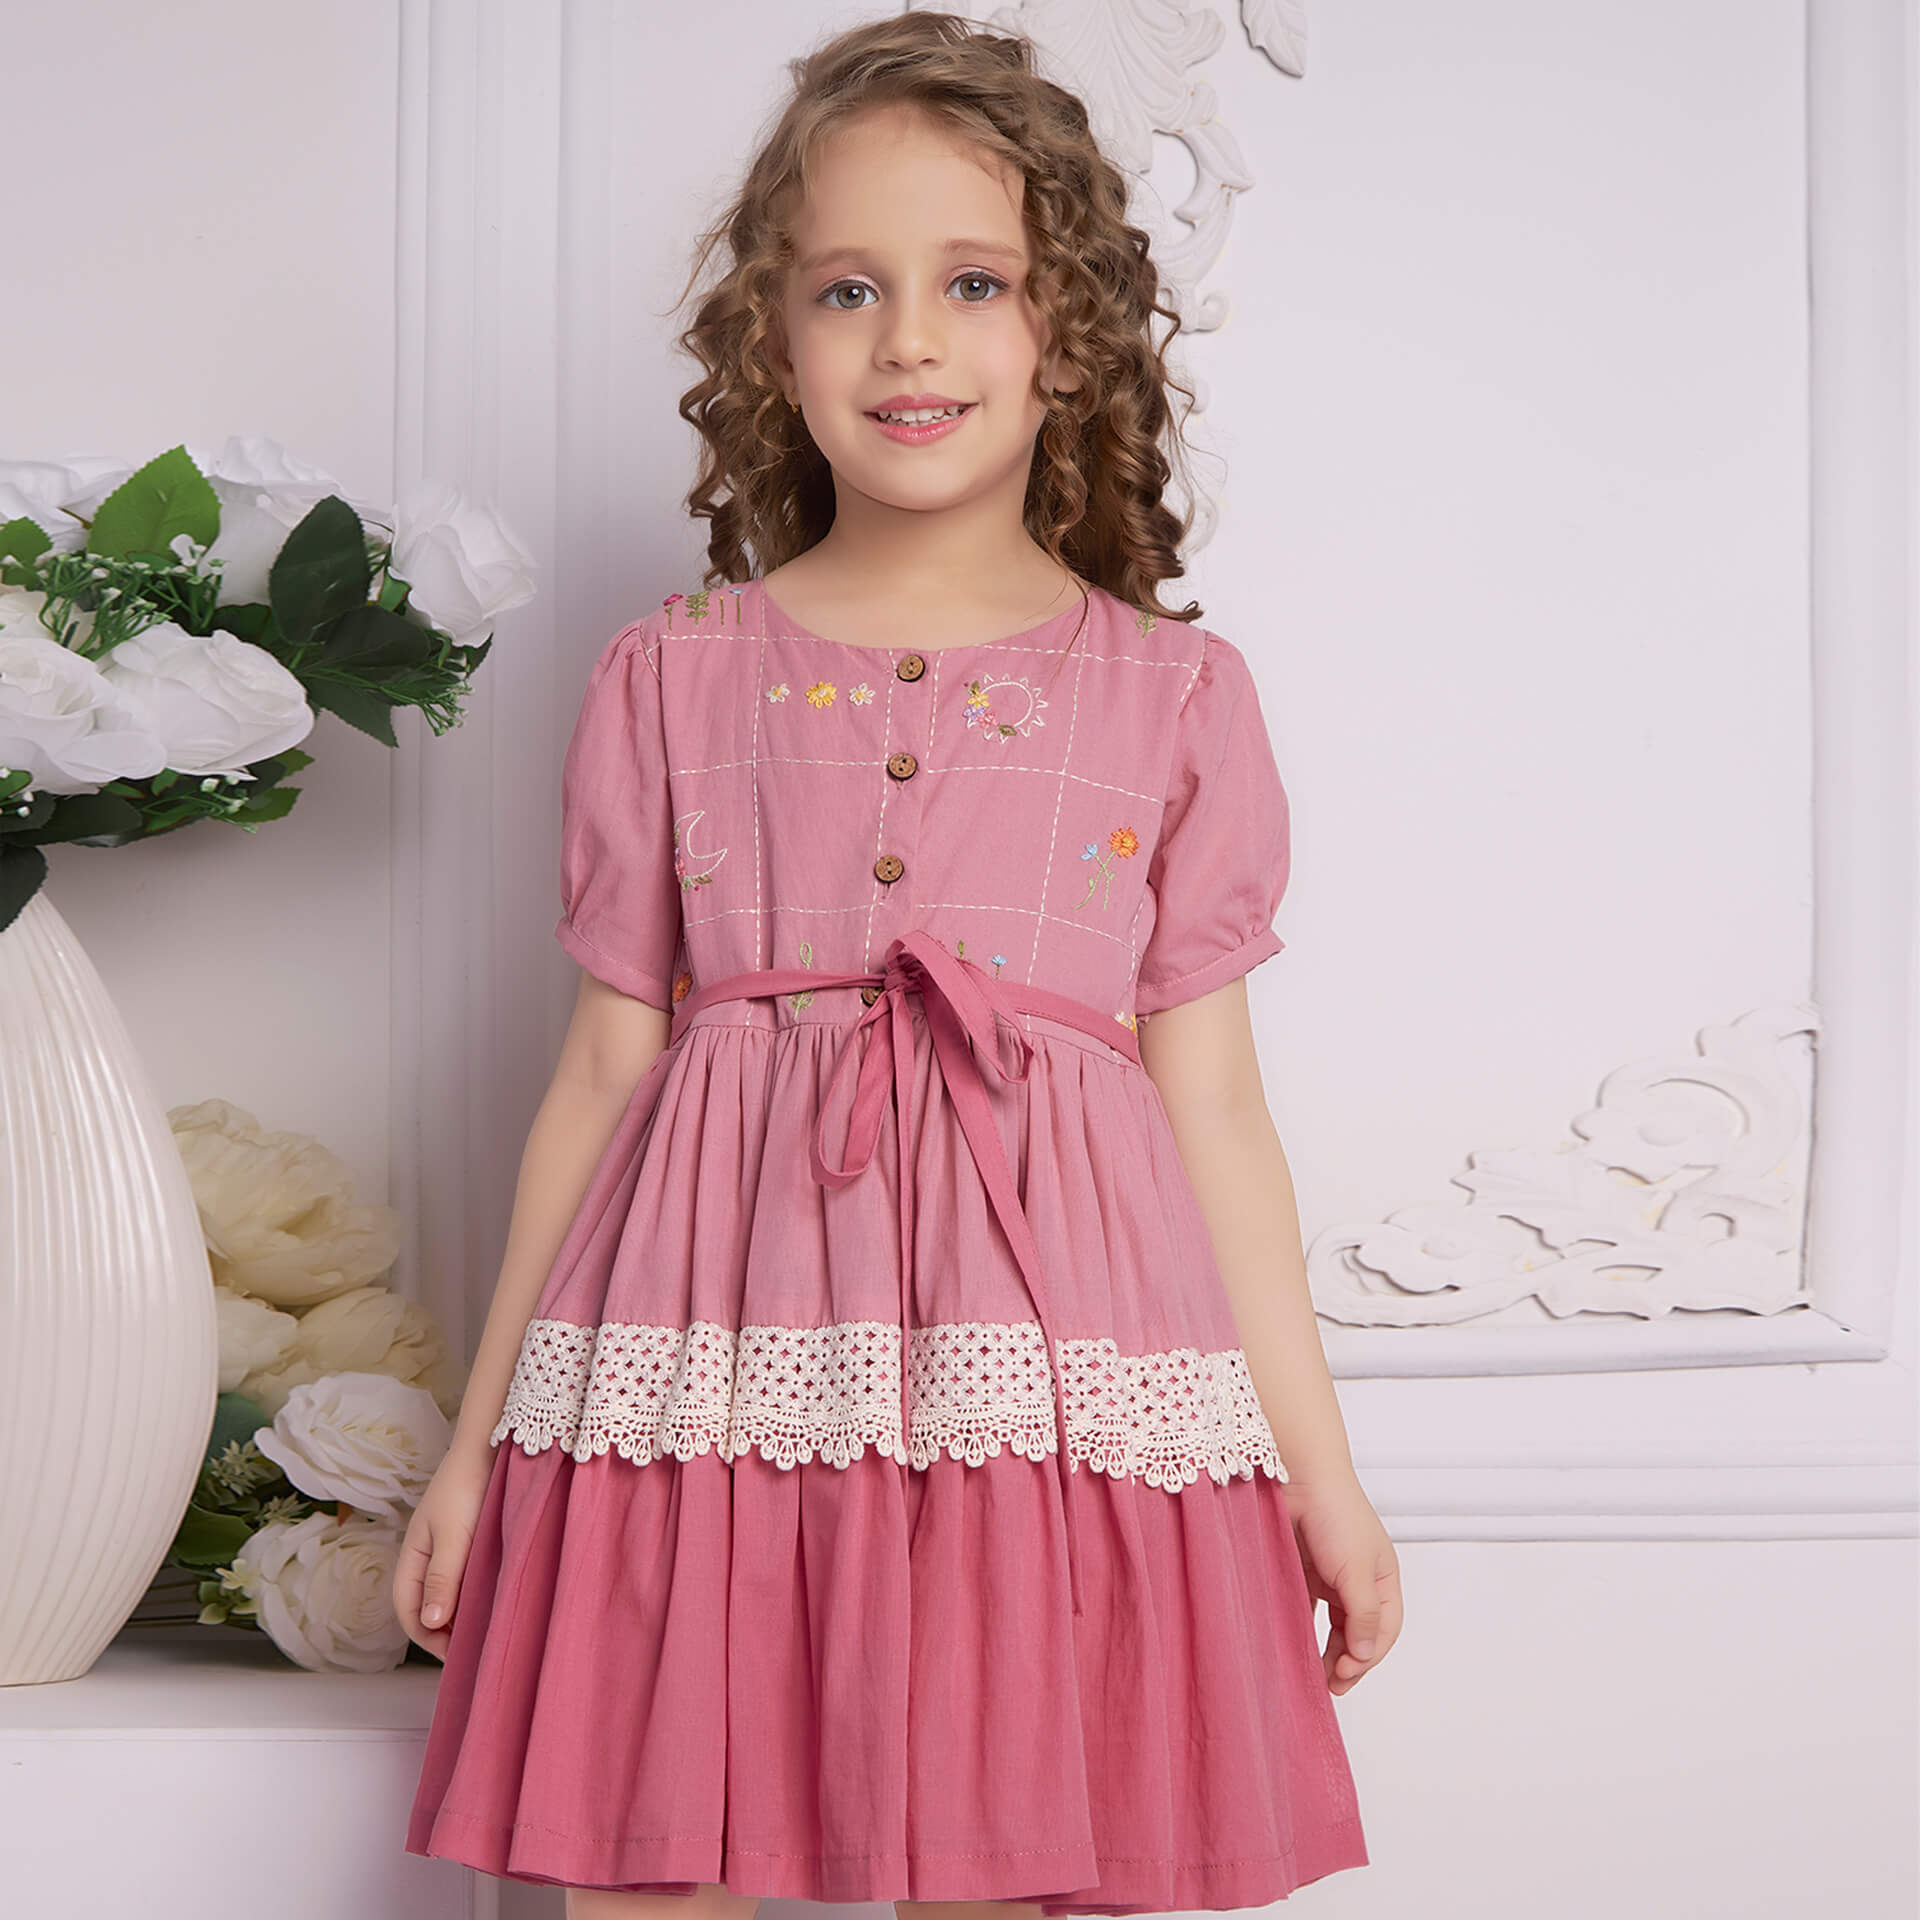 A curly haired girl posing in pink ombre embroidered dress